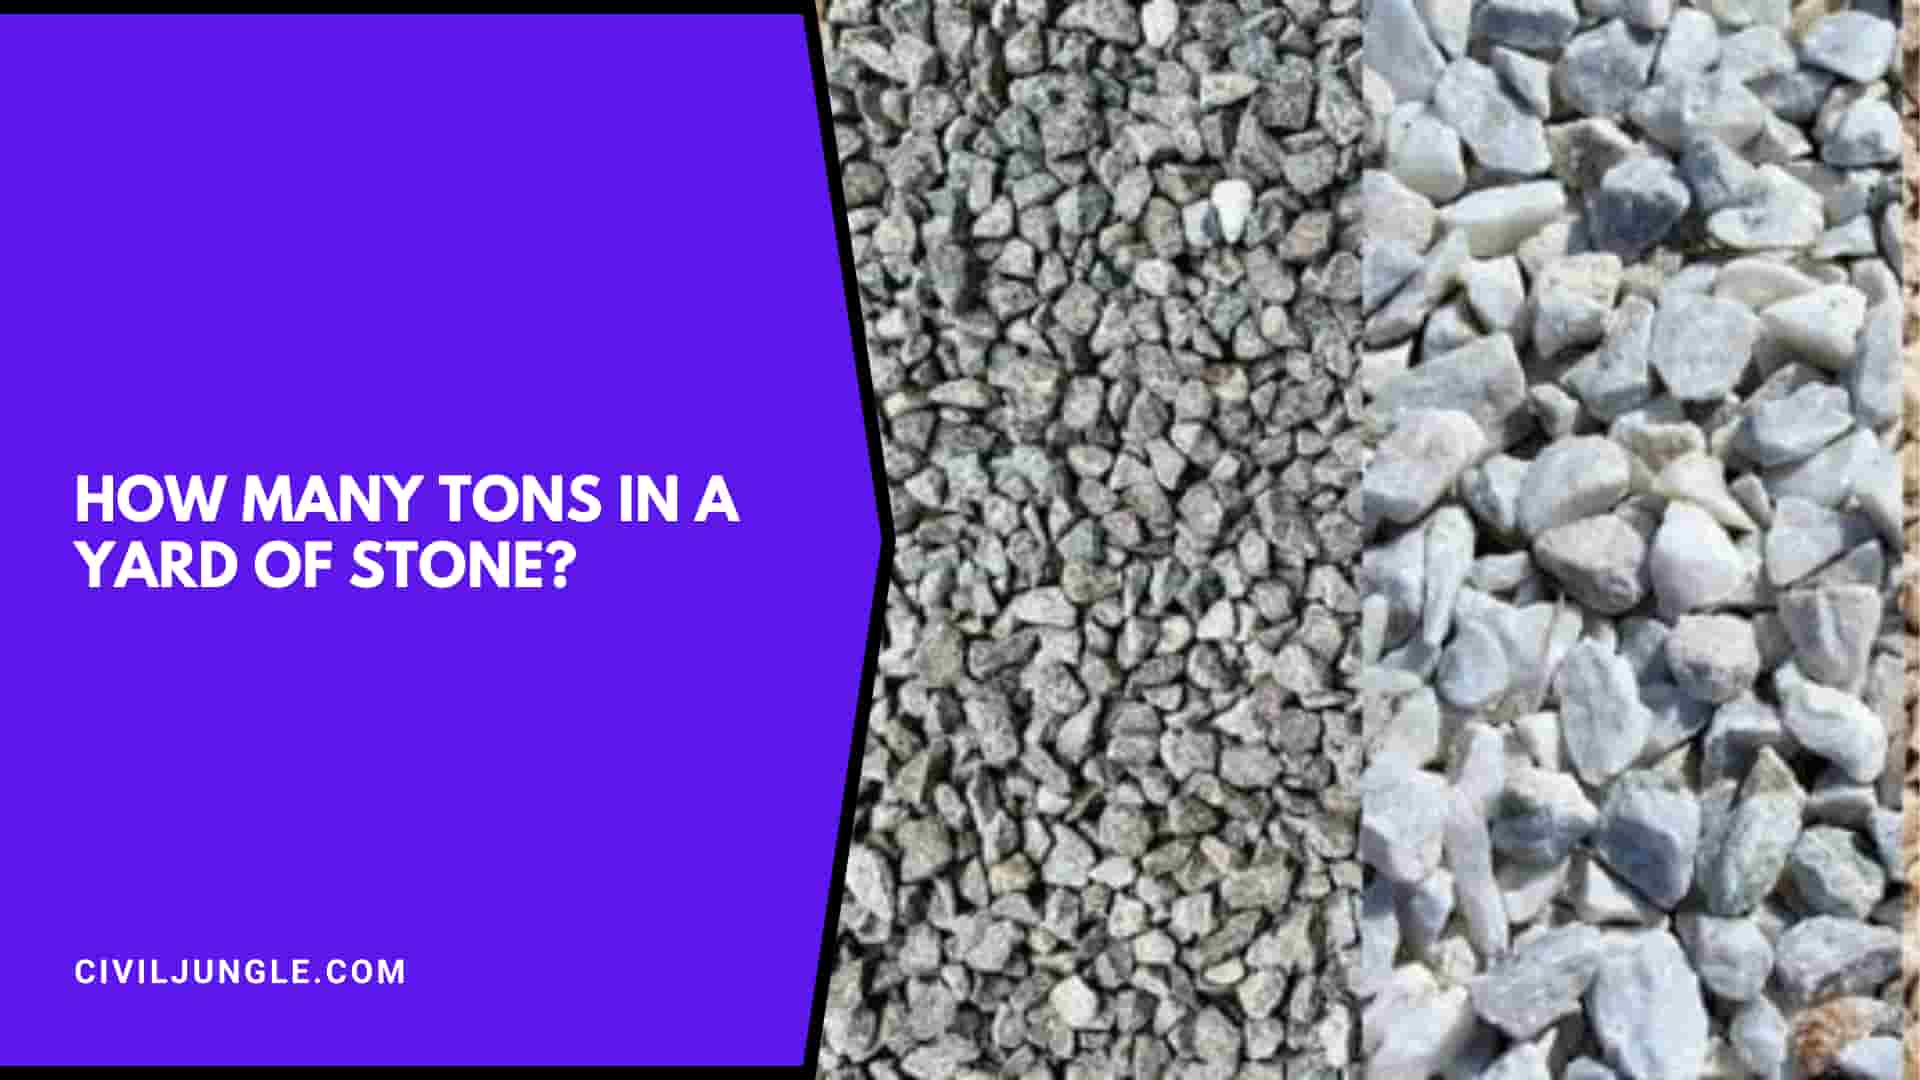 How Many Tons in a Yard of Stone?